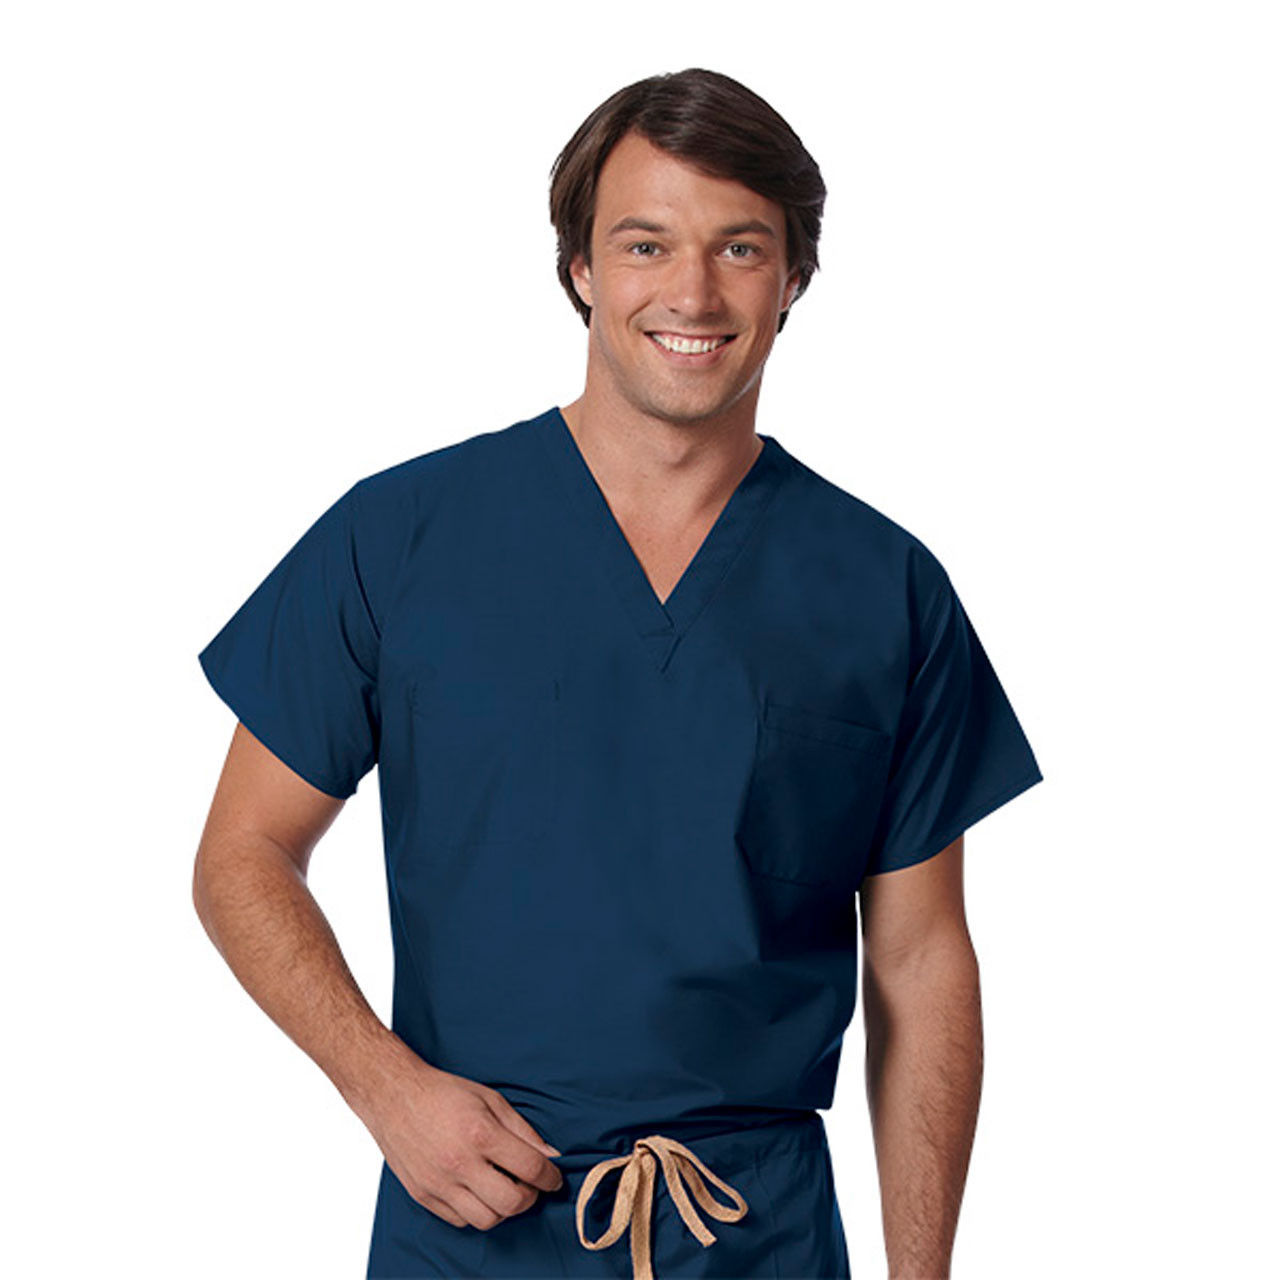 Unisex Reversible Wholesale Hospital Scrubs with Pocket, Navy Questions & Answers